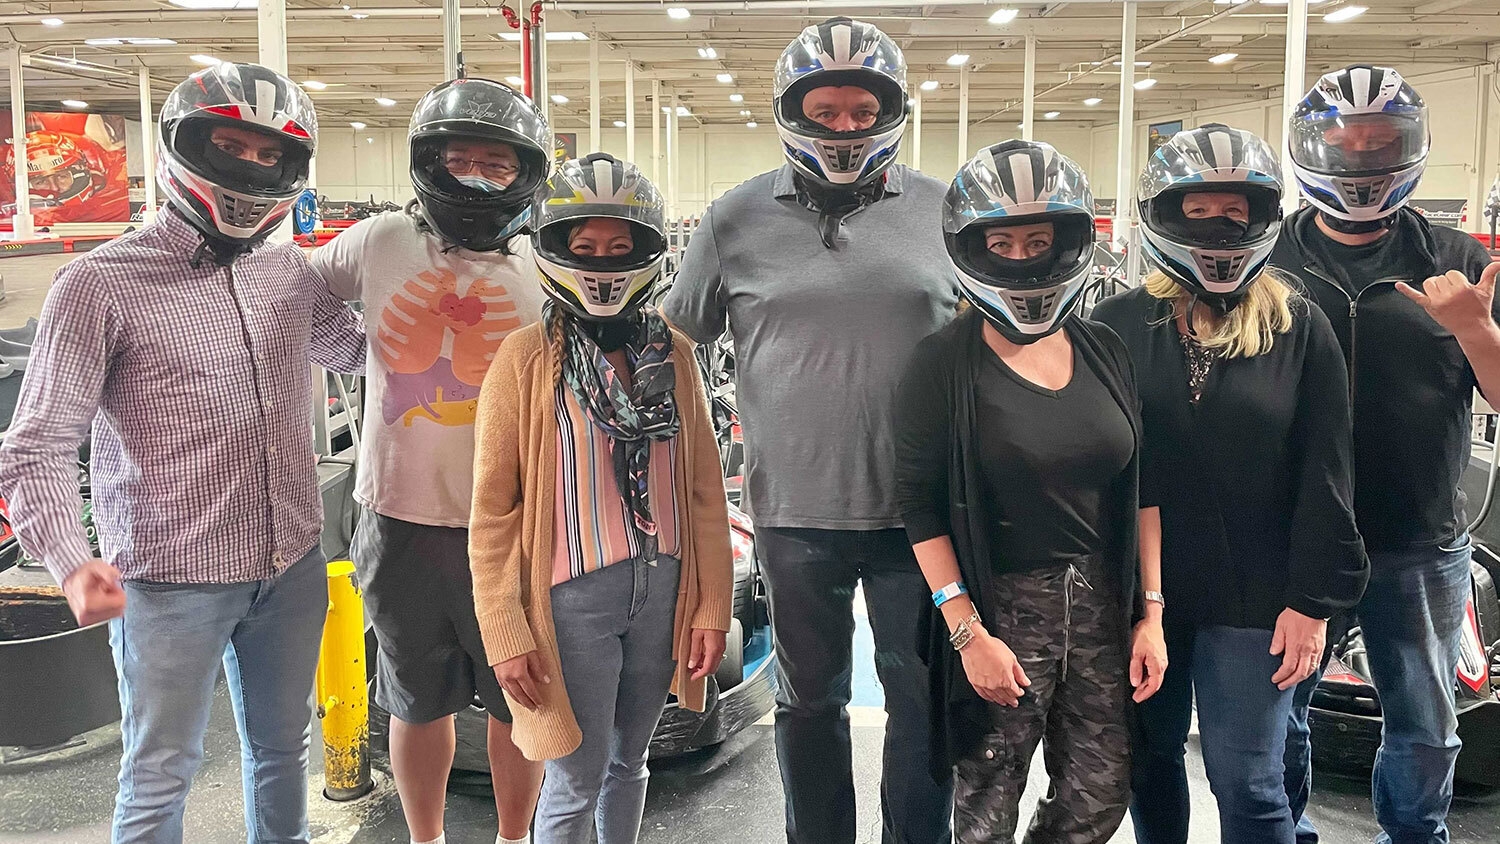 Friendly rivalry at the go-kart track.